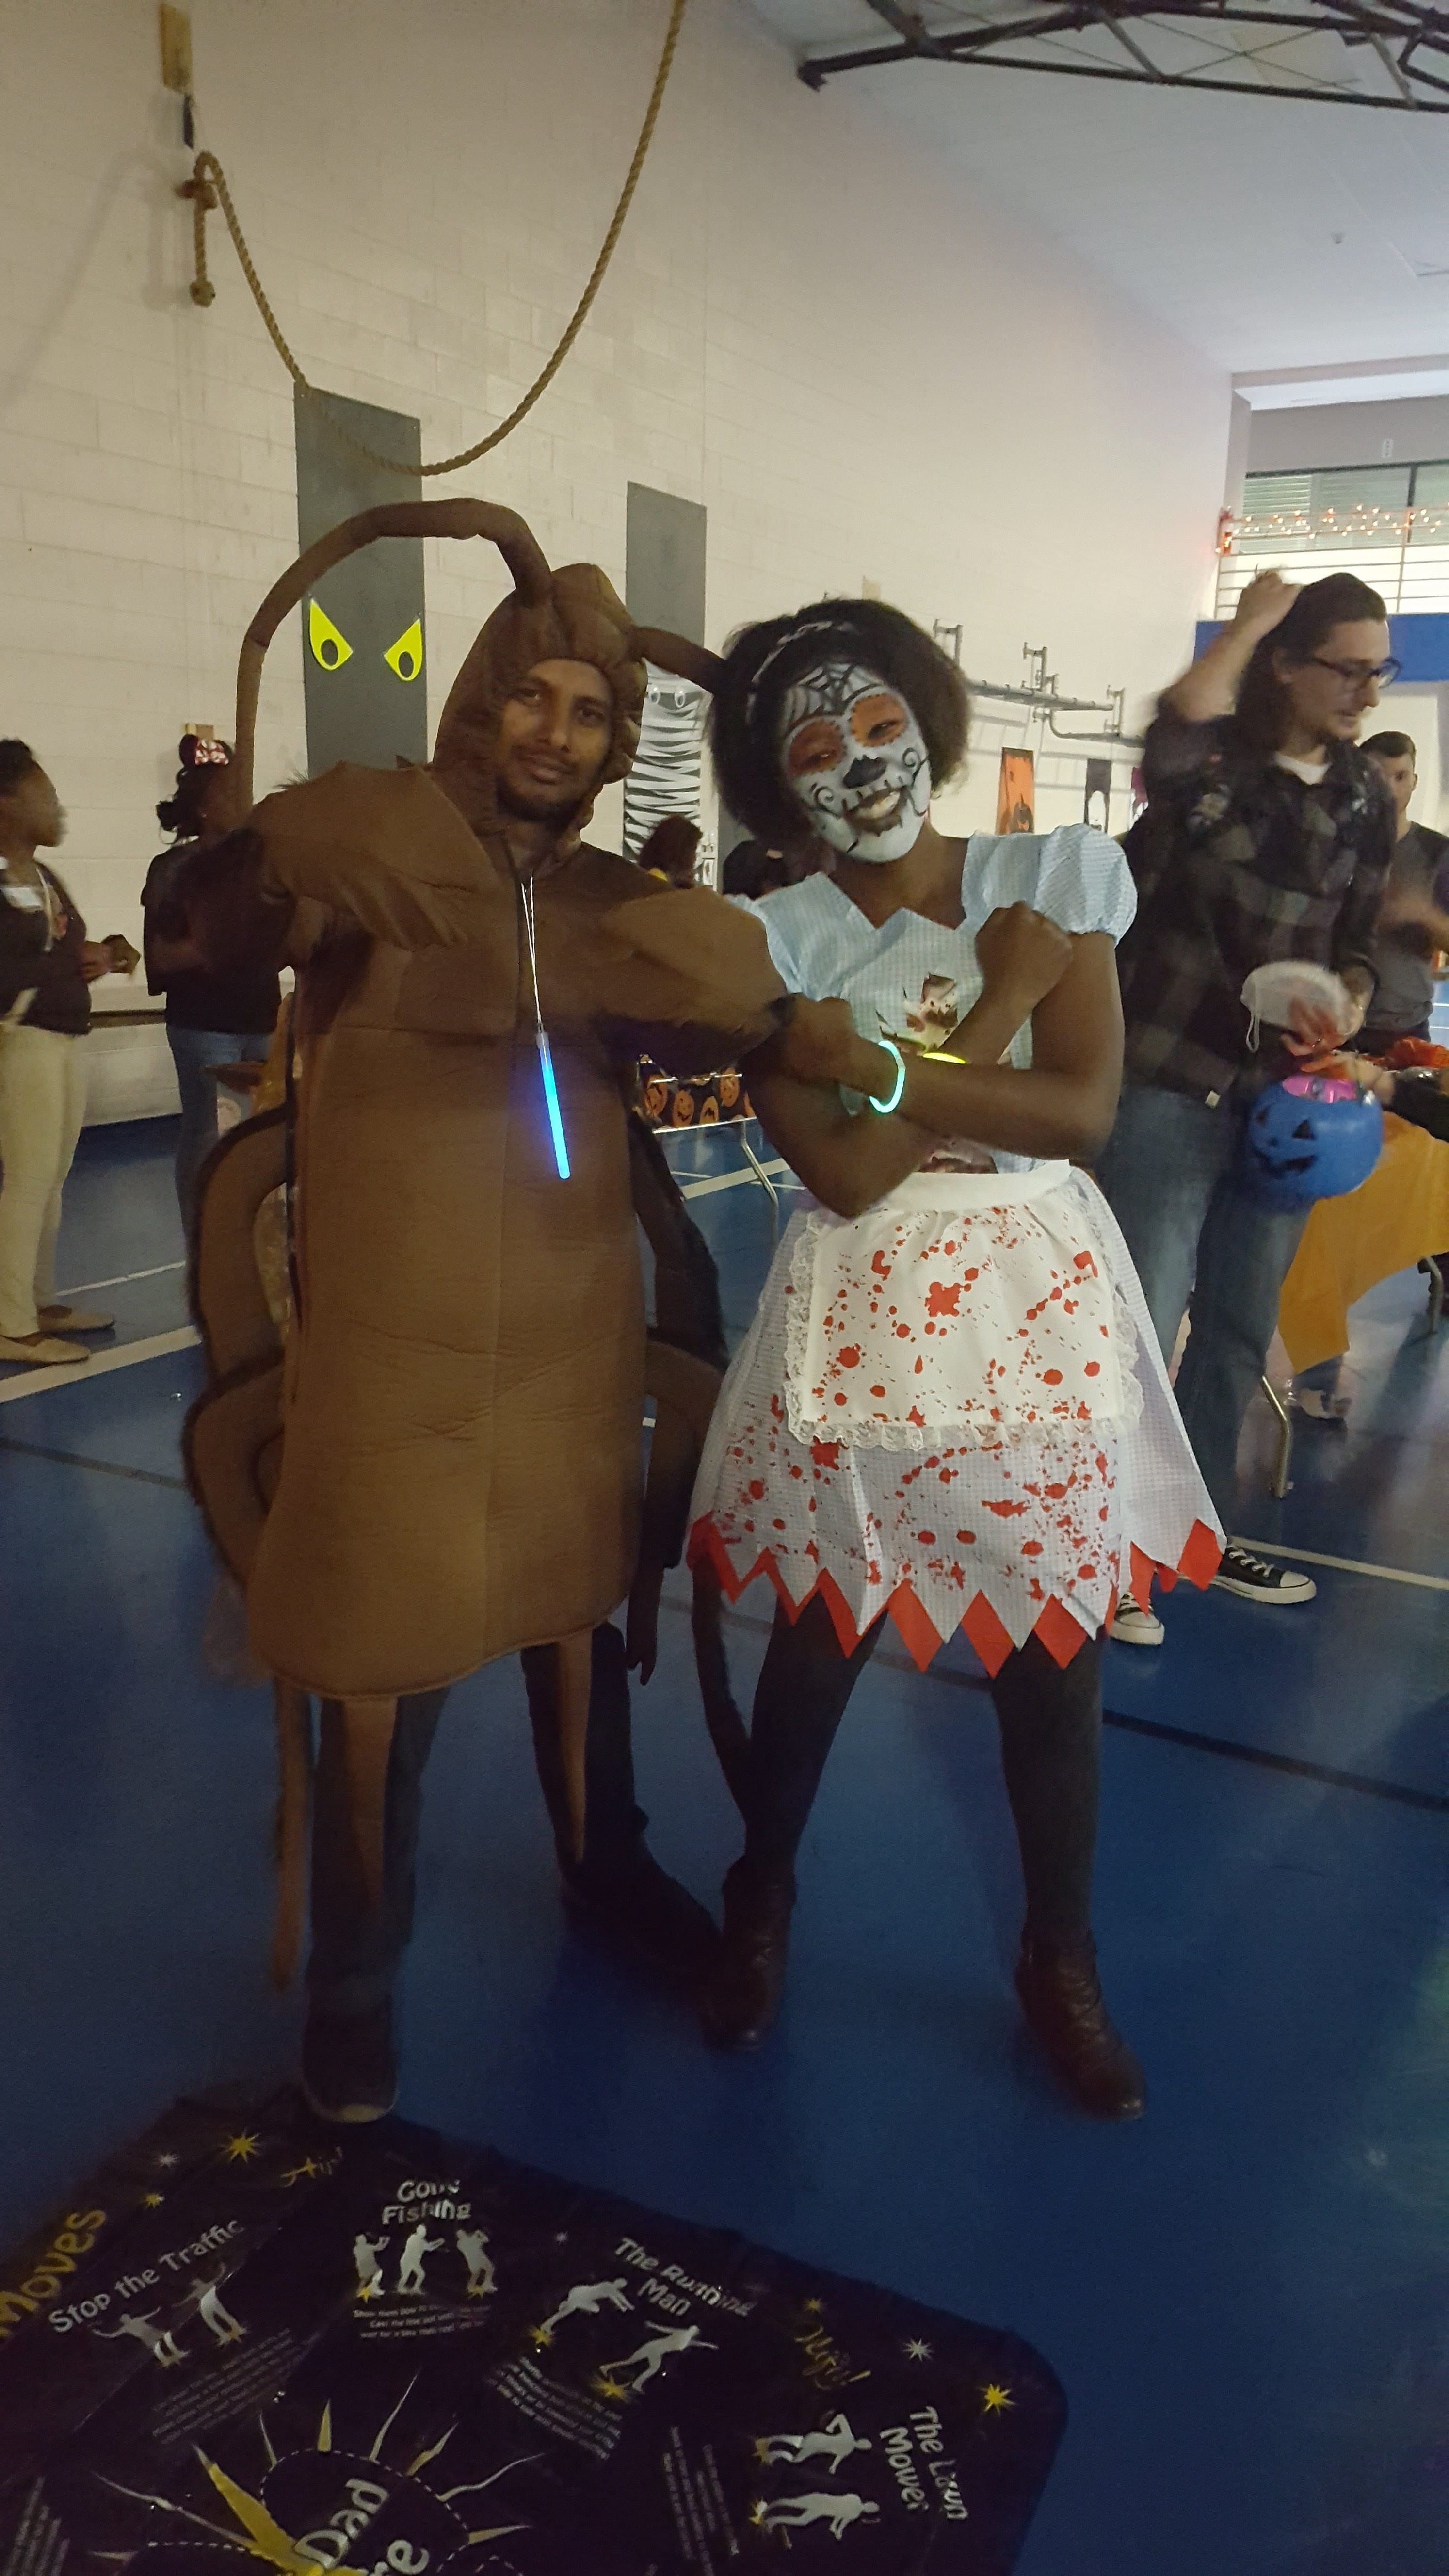 Two volunteers dressed in Halloween costumes give sugar-free candy to children.